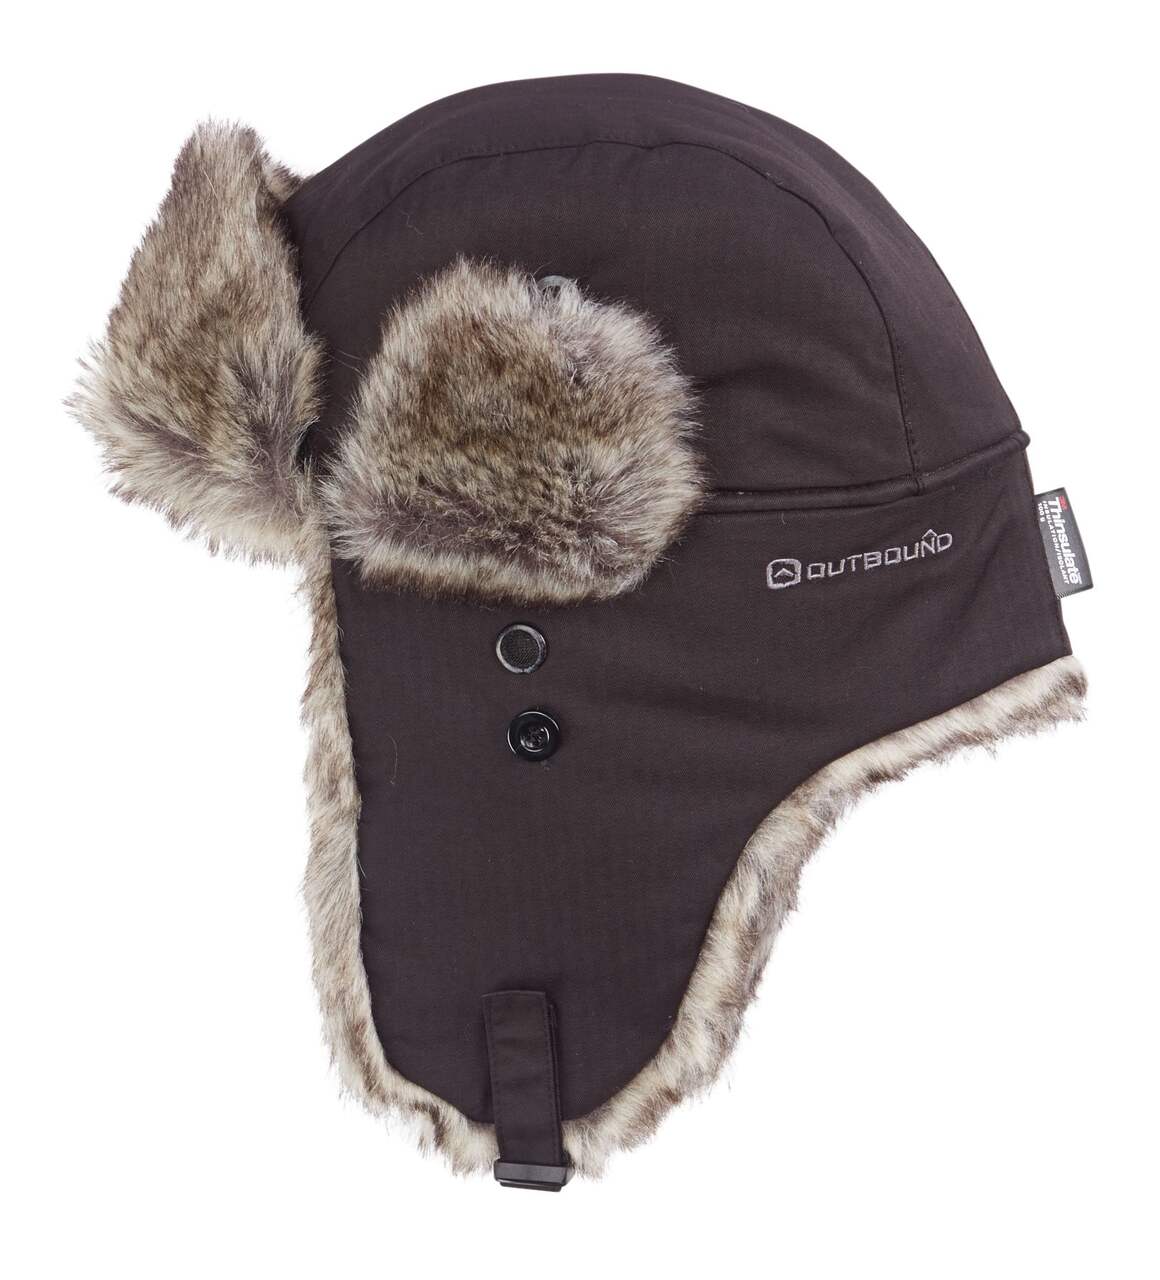 Outbound Unisex Insulated Fur Winter Aviator Trapper Ear Flaps Hat